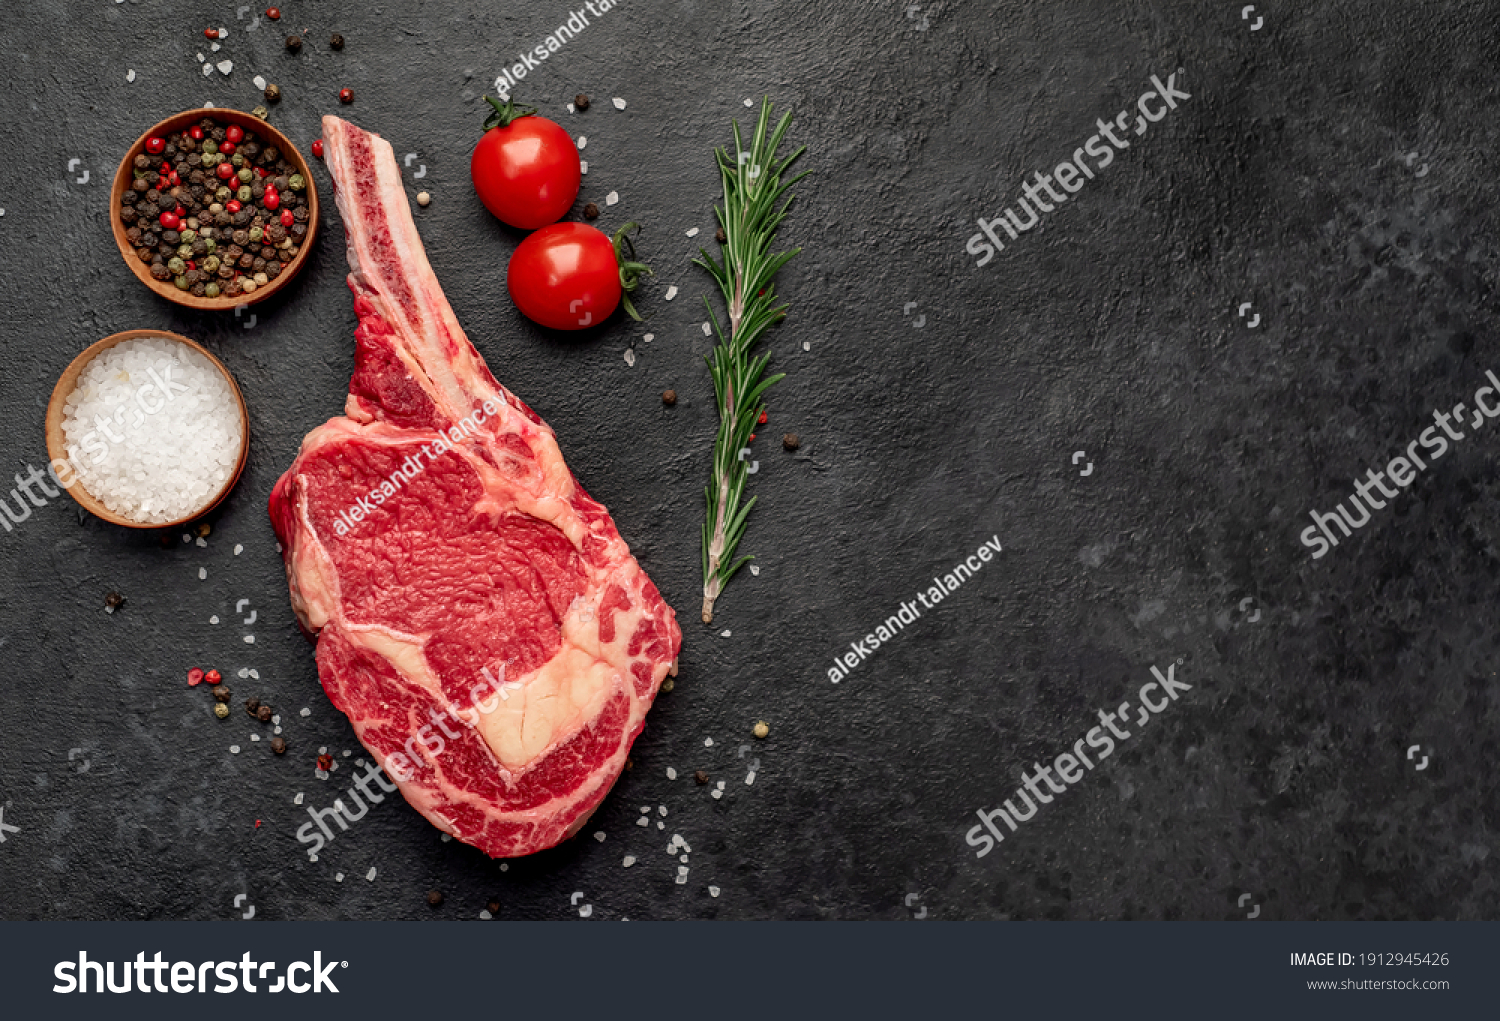 Raw cowboy steak with spices on stone background #1912945426